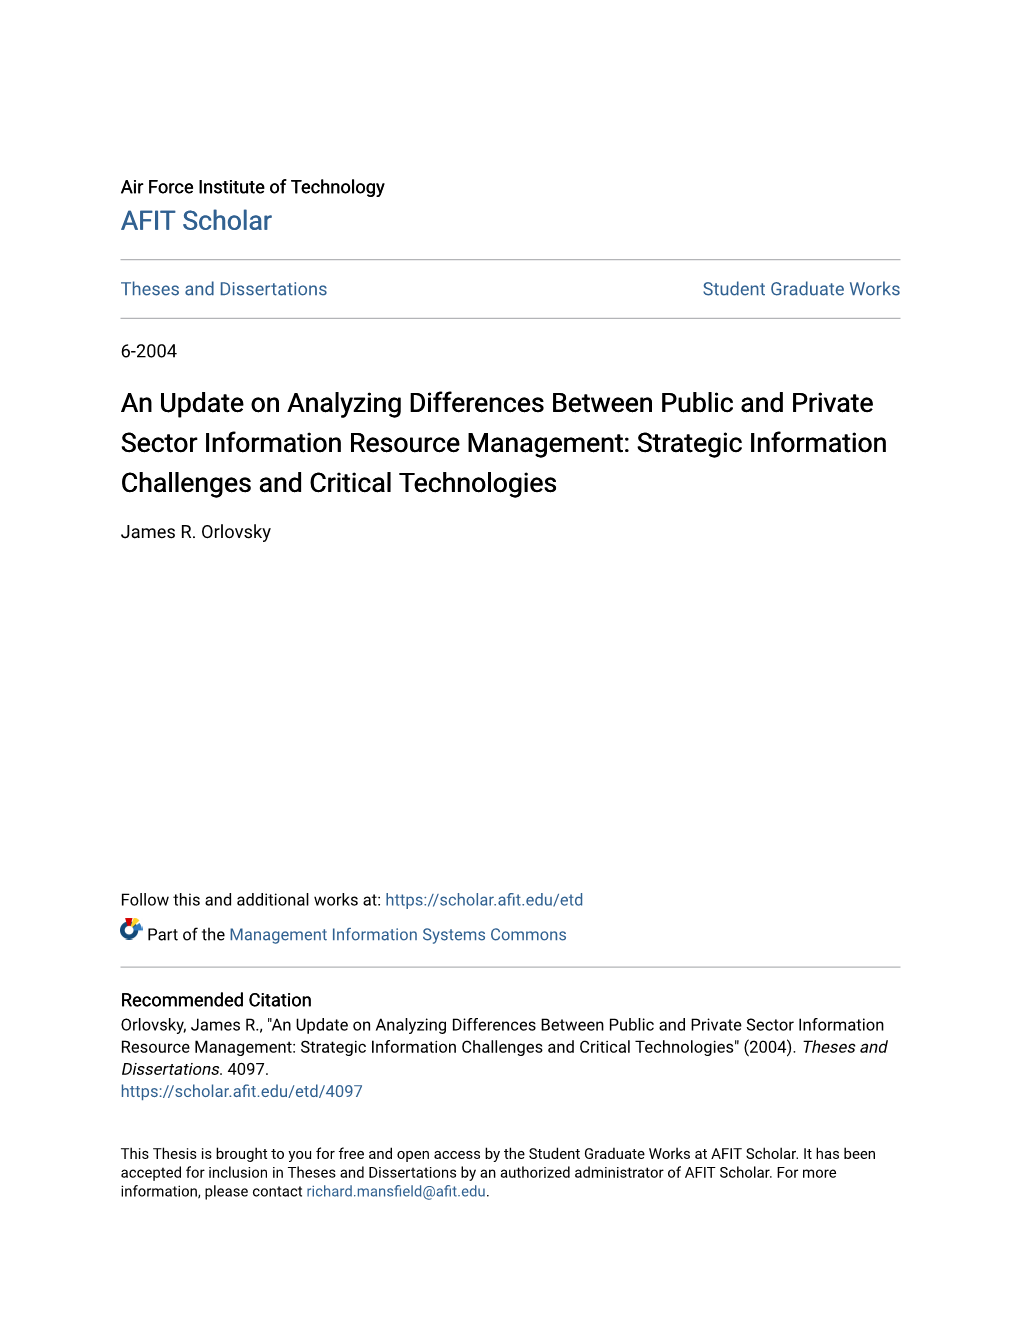 An Update on Analyzing Differences Between Public and Private Sector Information Resource Management: Strategic Information Challenges and Critical Technologies